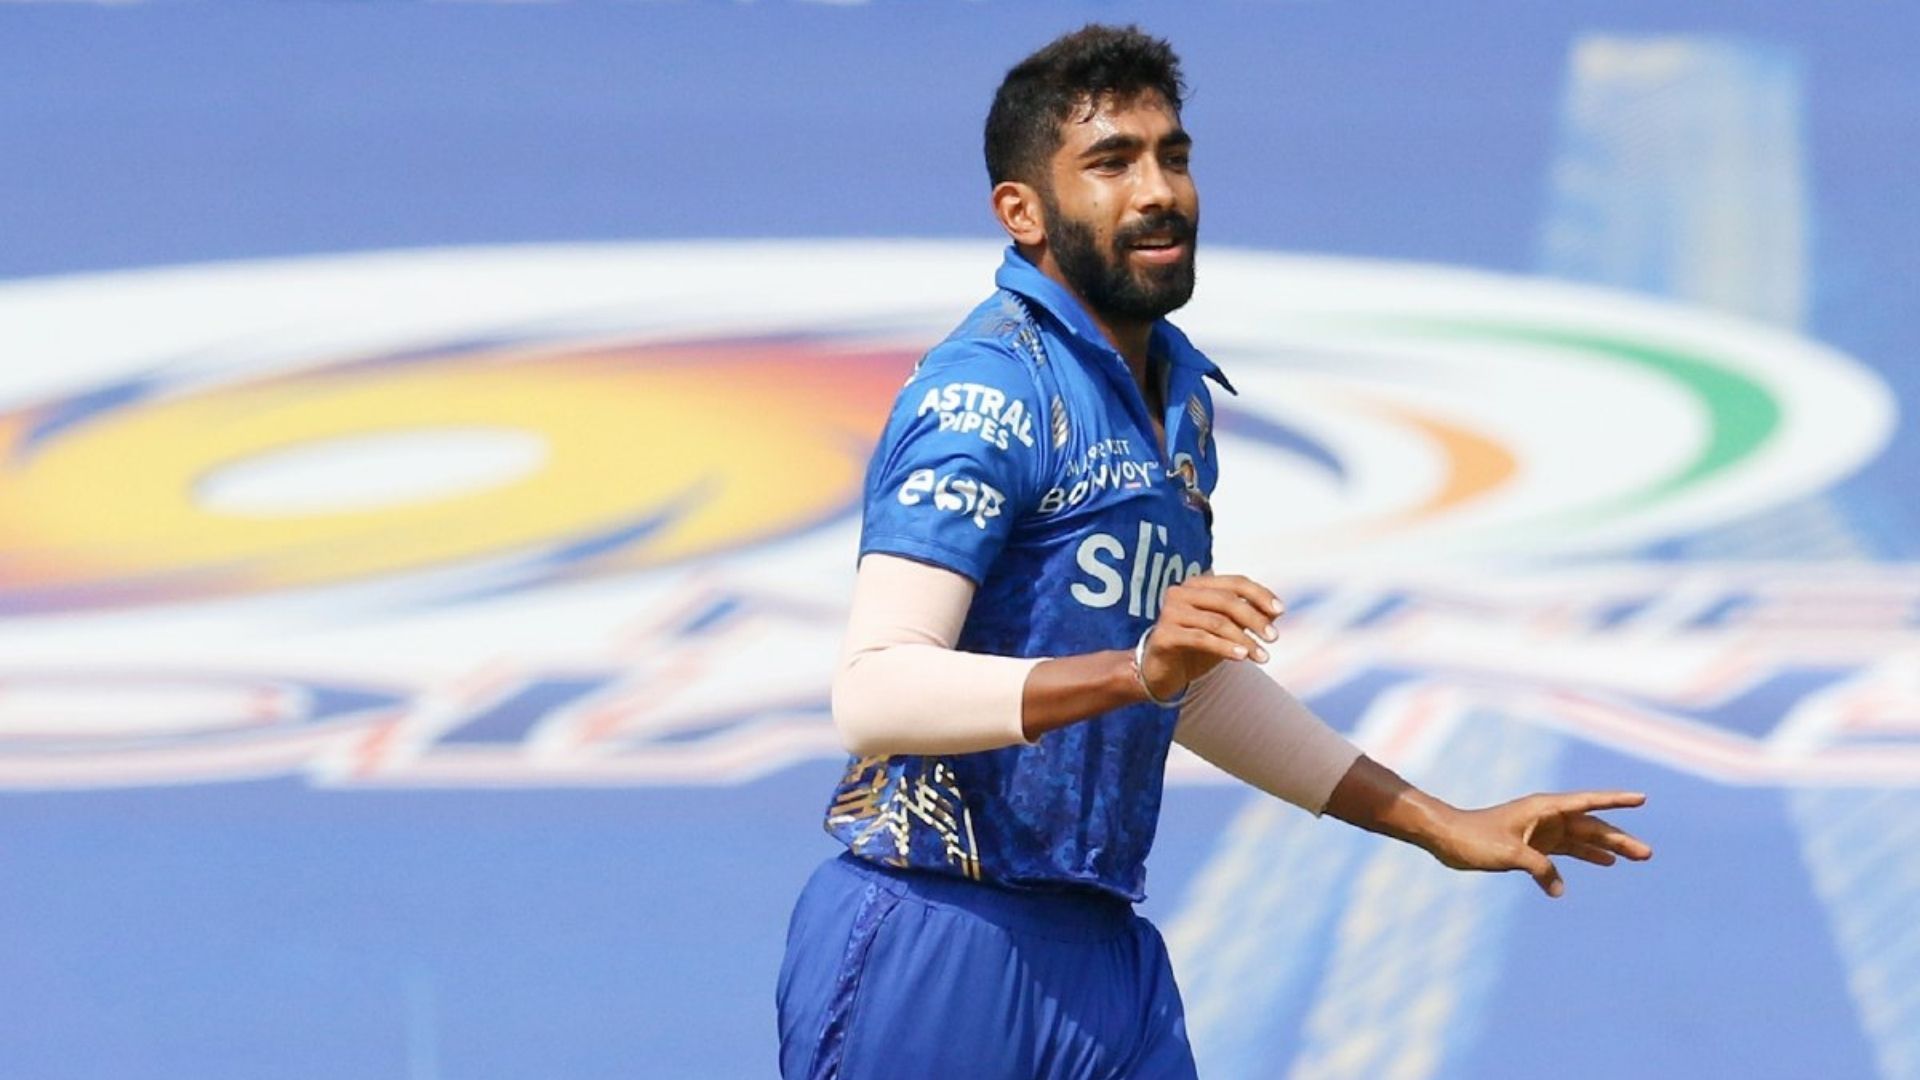 Jasprit Bumrah was brilliant against RR and will need to replicate his performance against KKR (P.C.:iplt20.com)